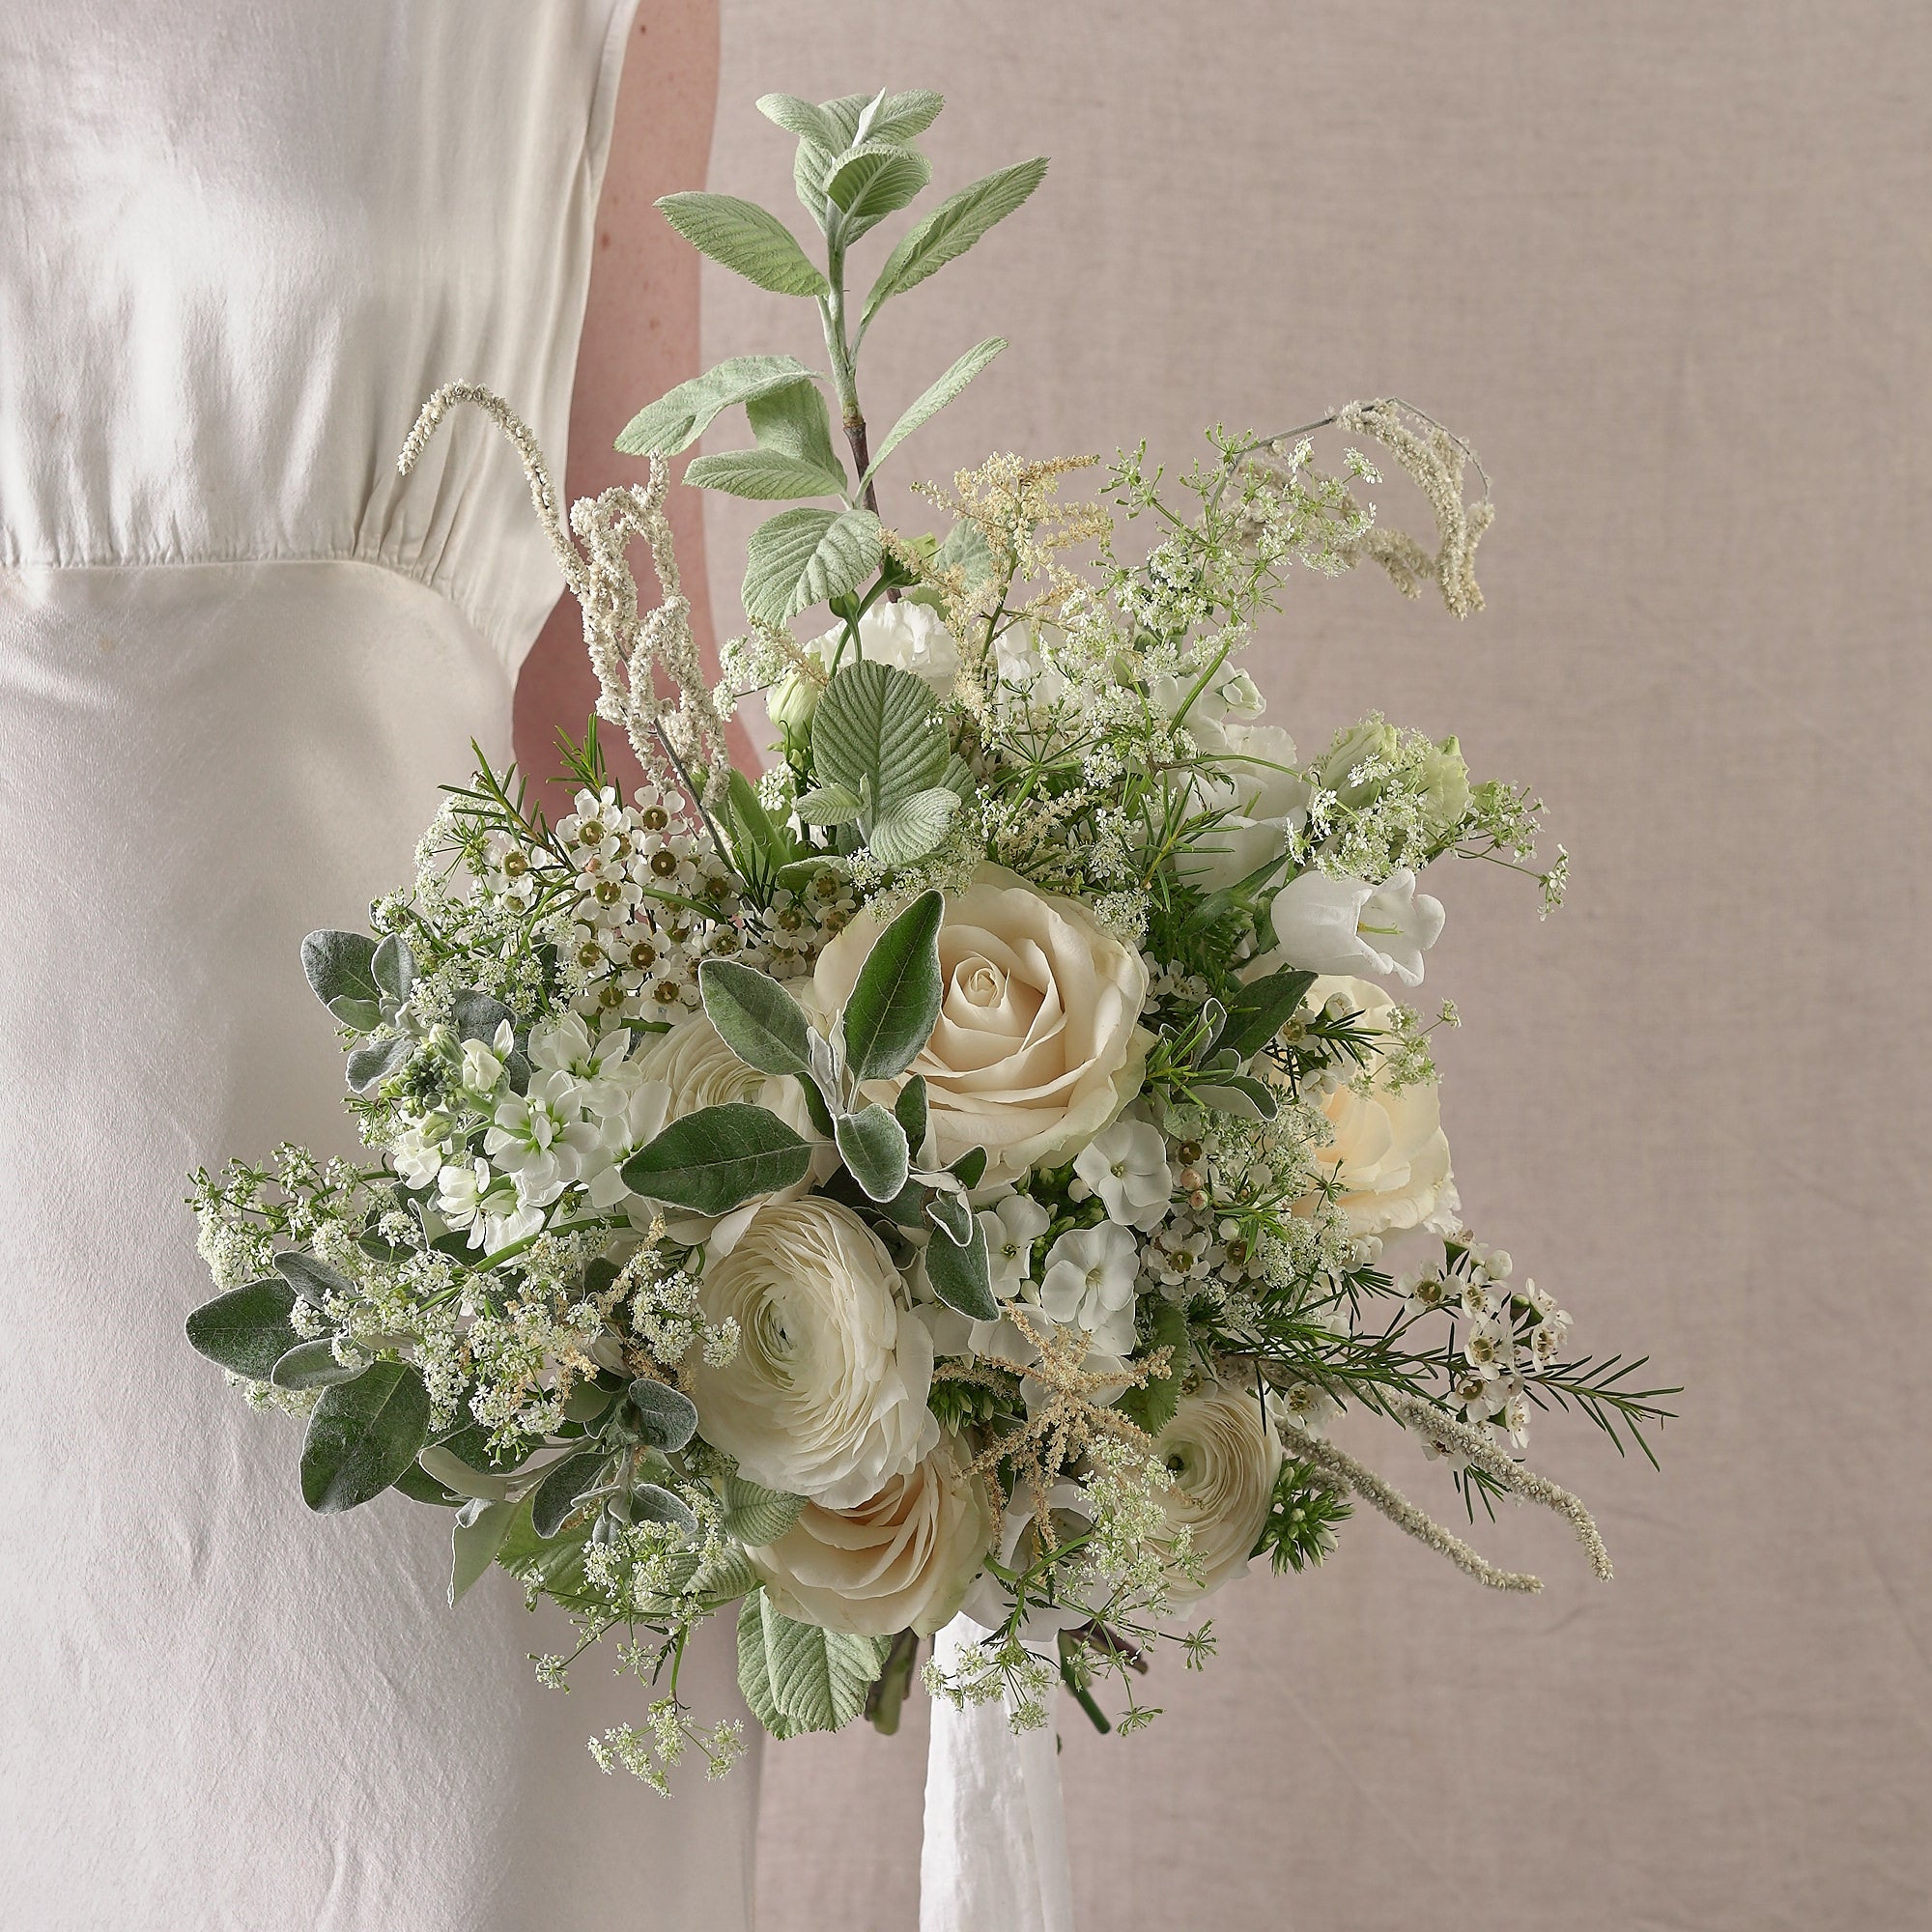 Bridal Bouquet - Loose Style of White Hydrangea, Roses and Foliage